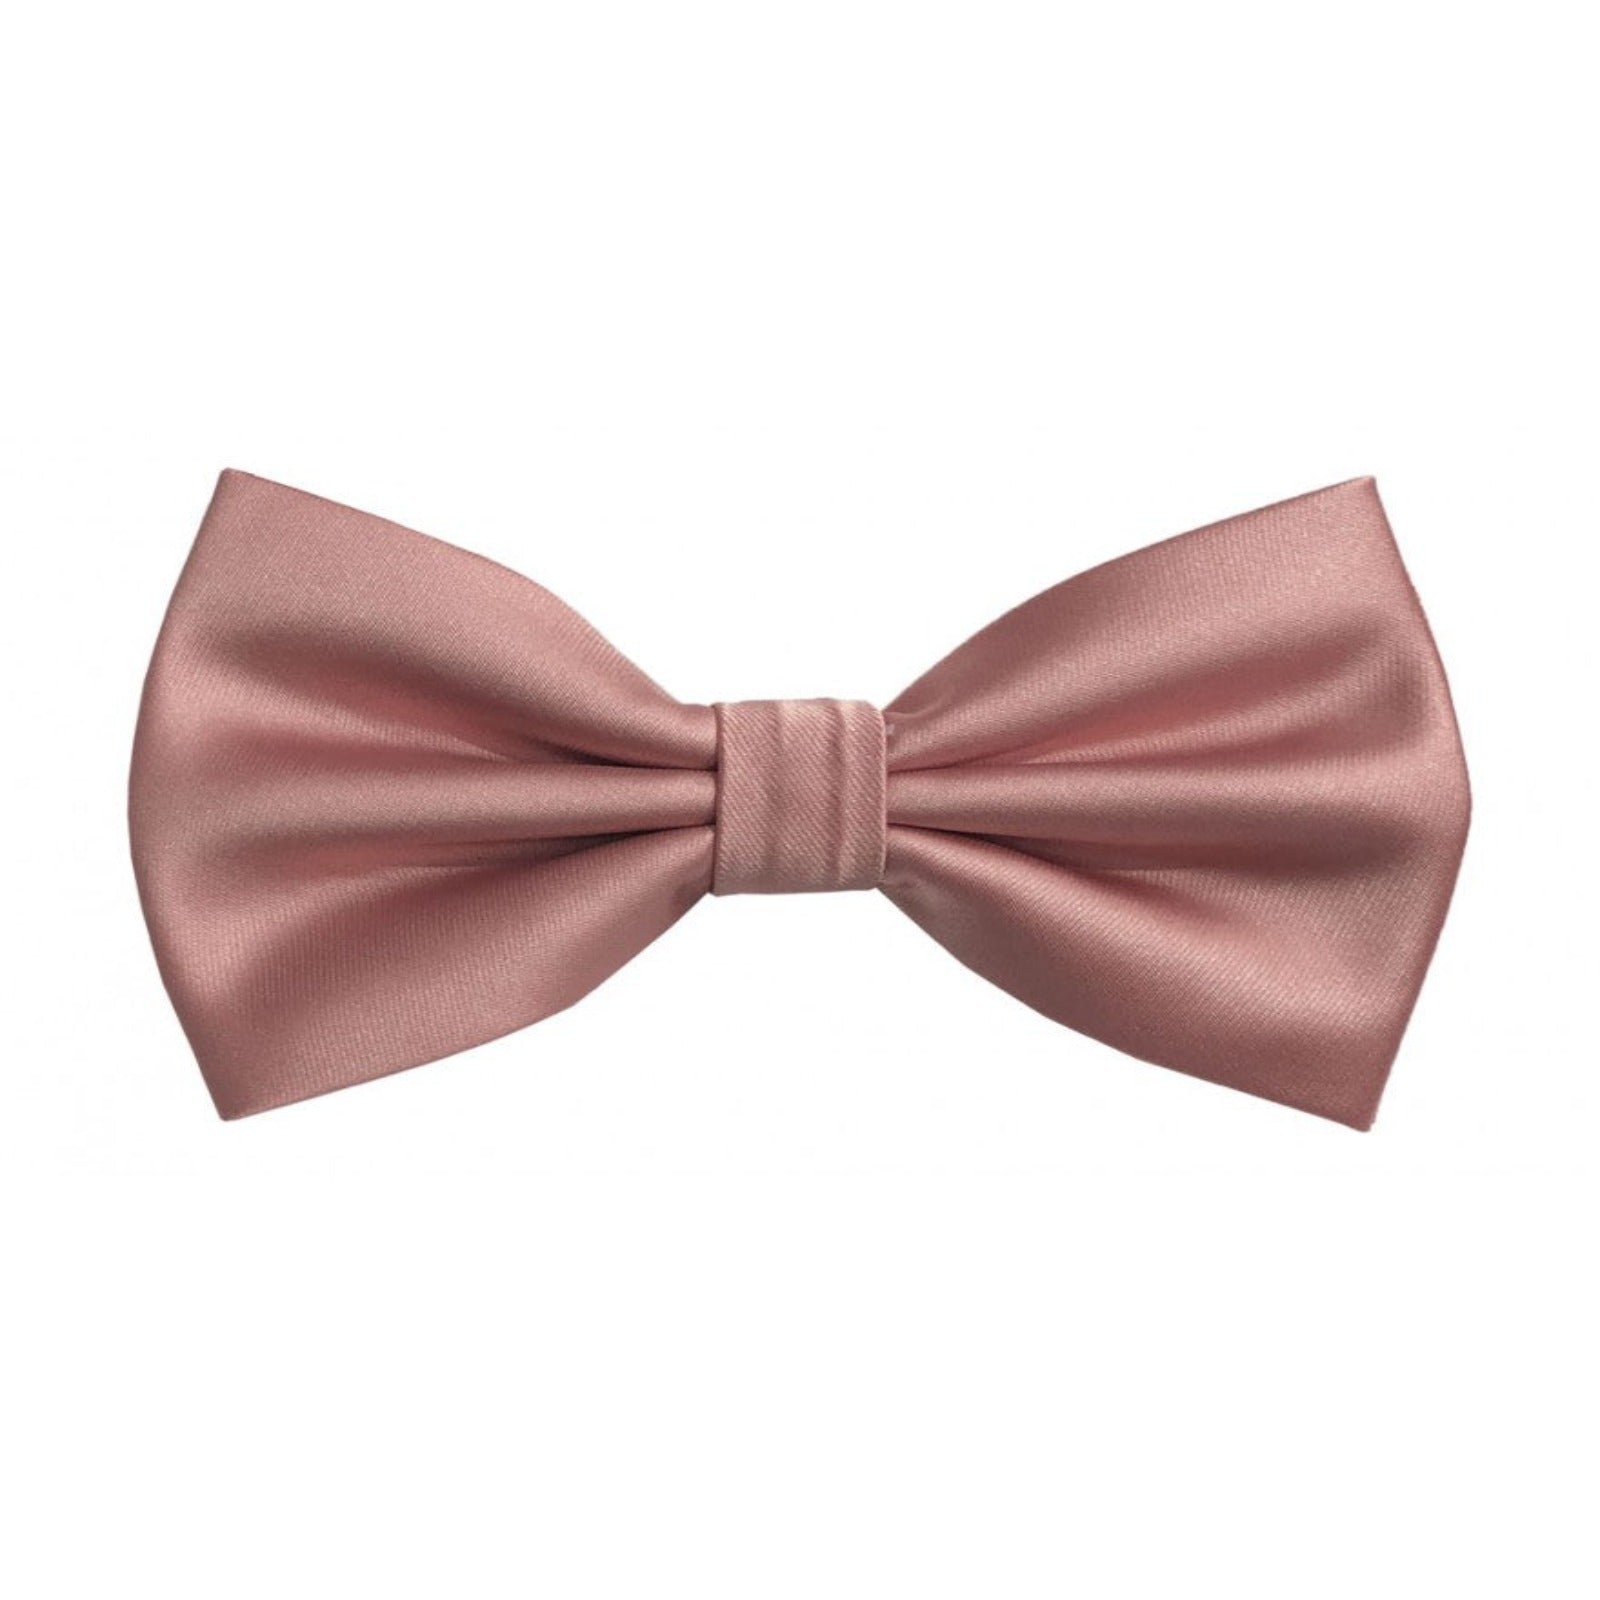 Classic Dusty Rose Bowtie With Matching Pocket Square | KCT Menswear